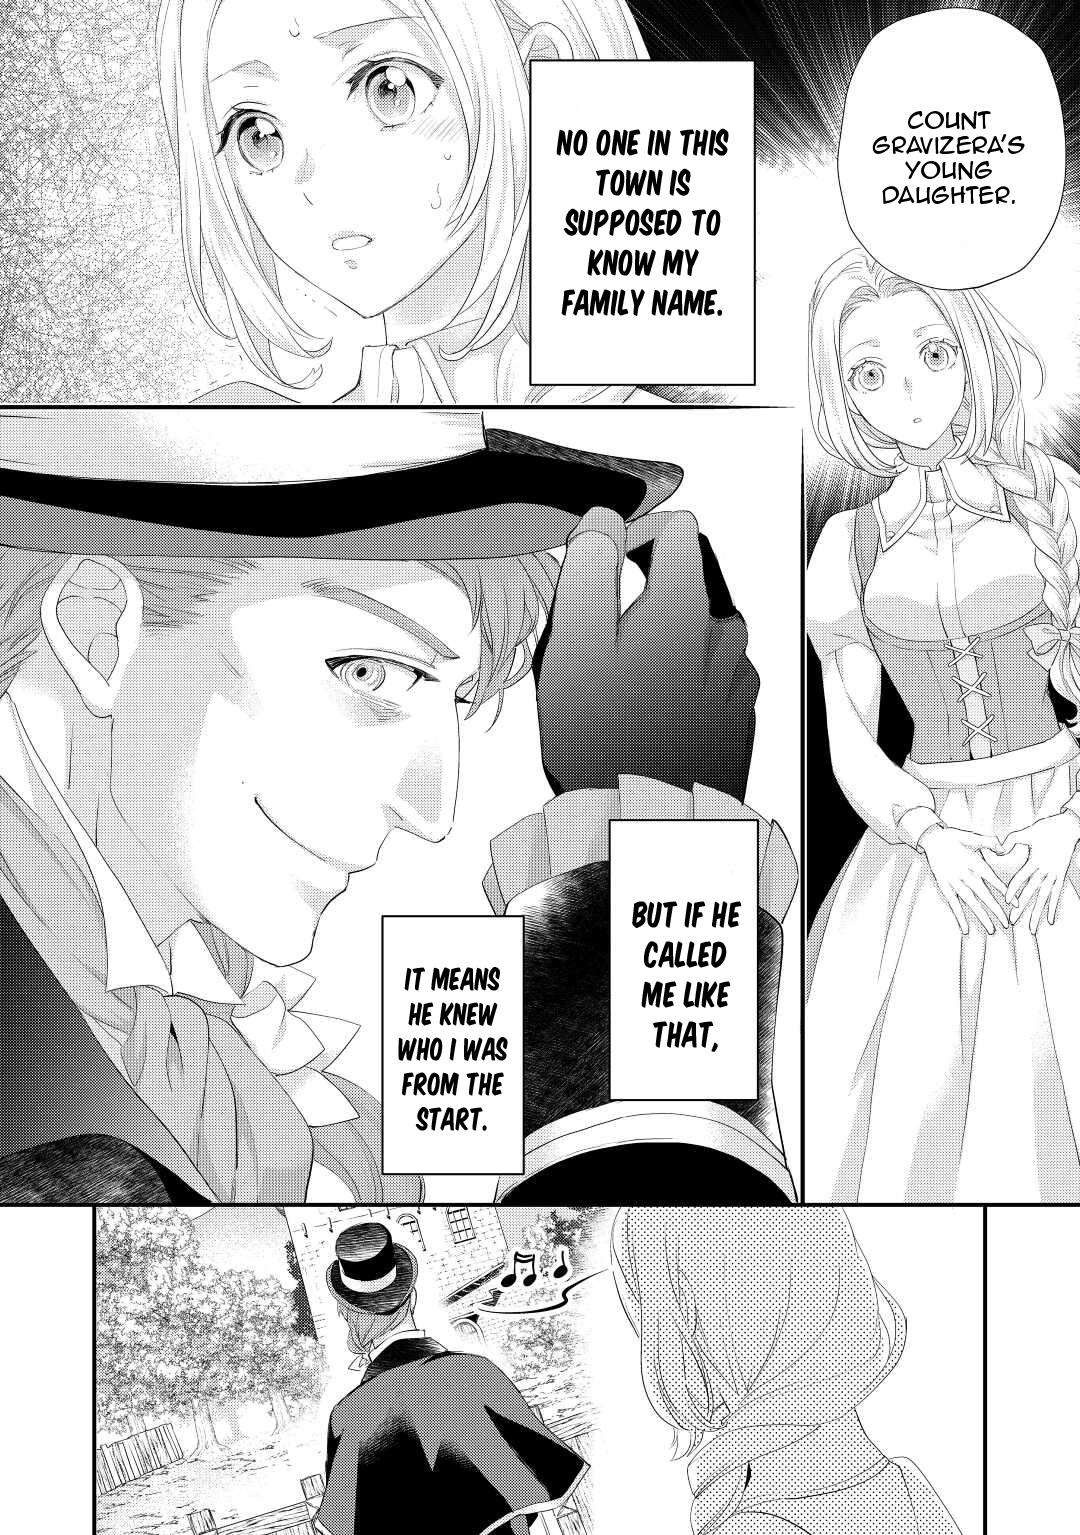 Milady Just Wants to Relax - chapter 33 - #5